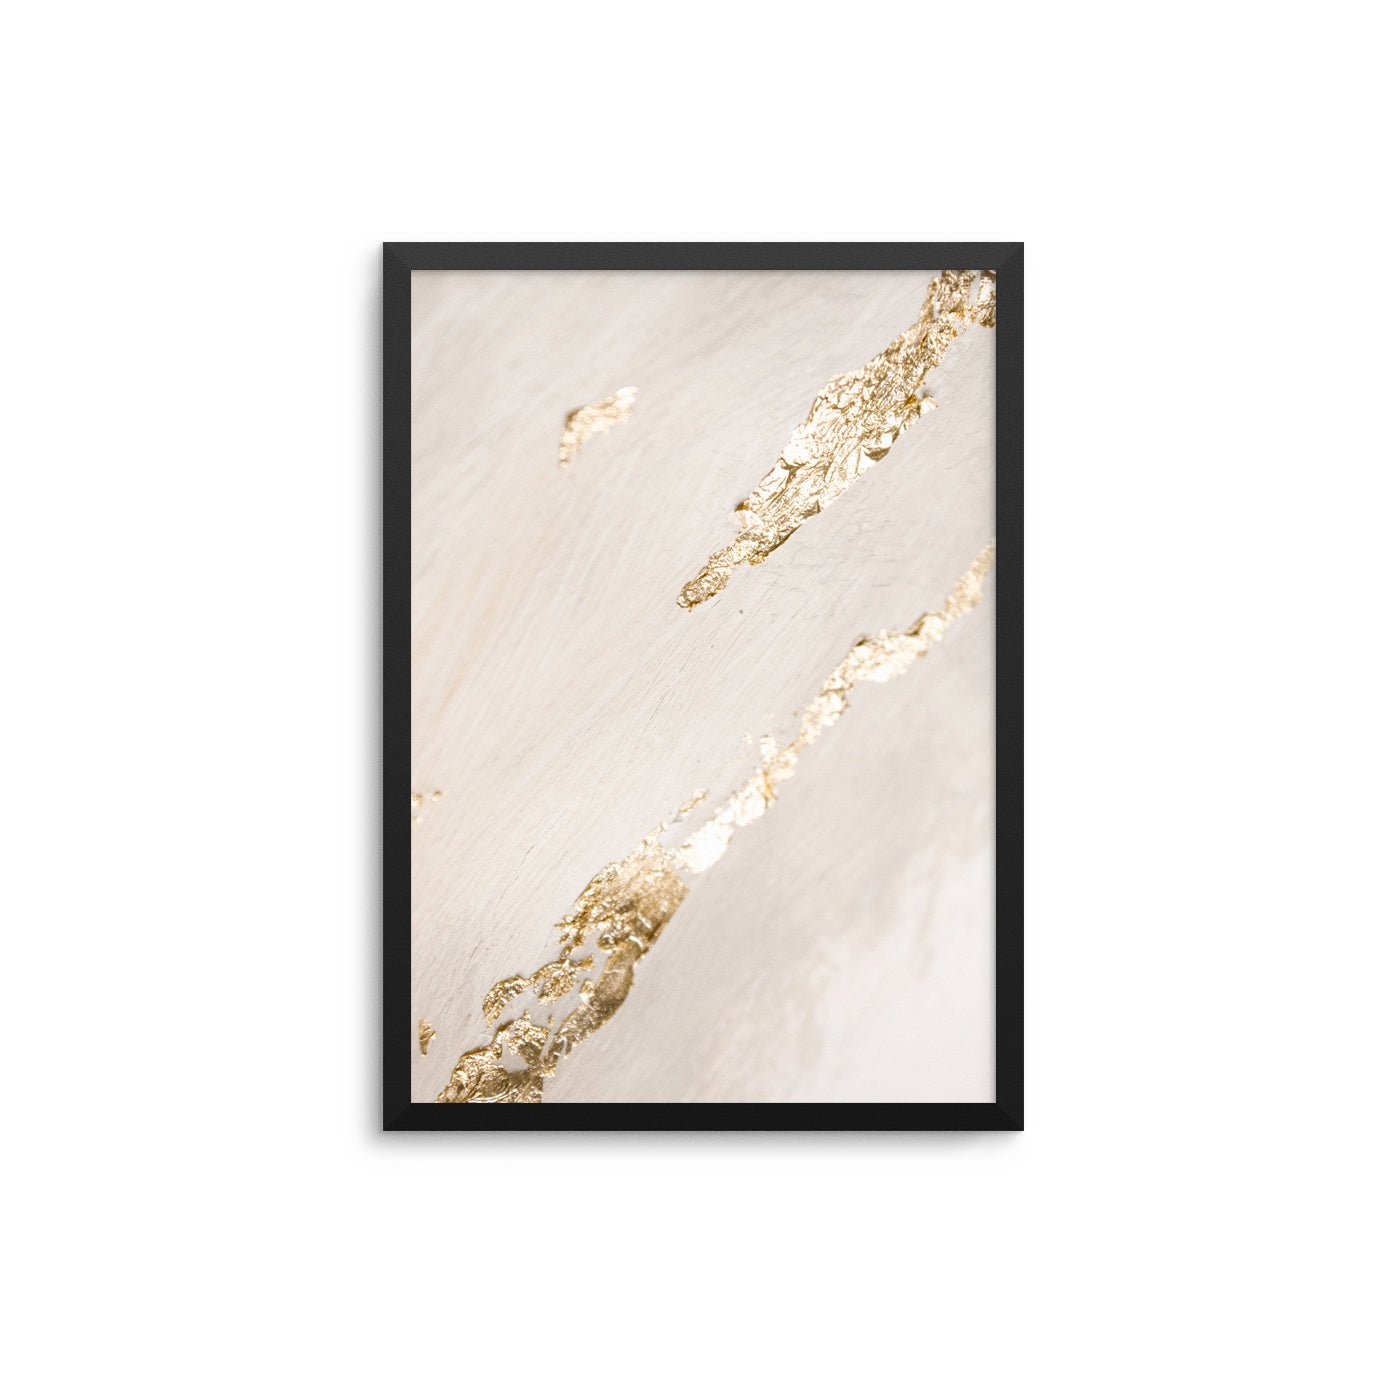 Blurred Gold II - D'Luxe Prints